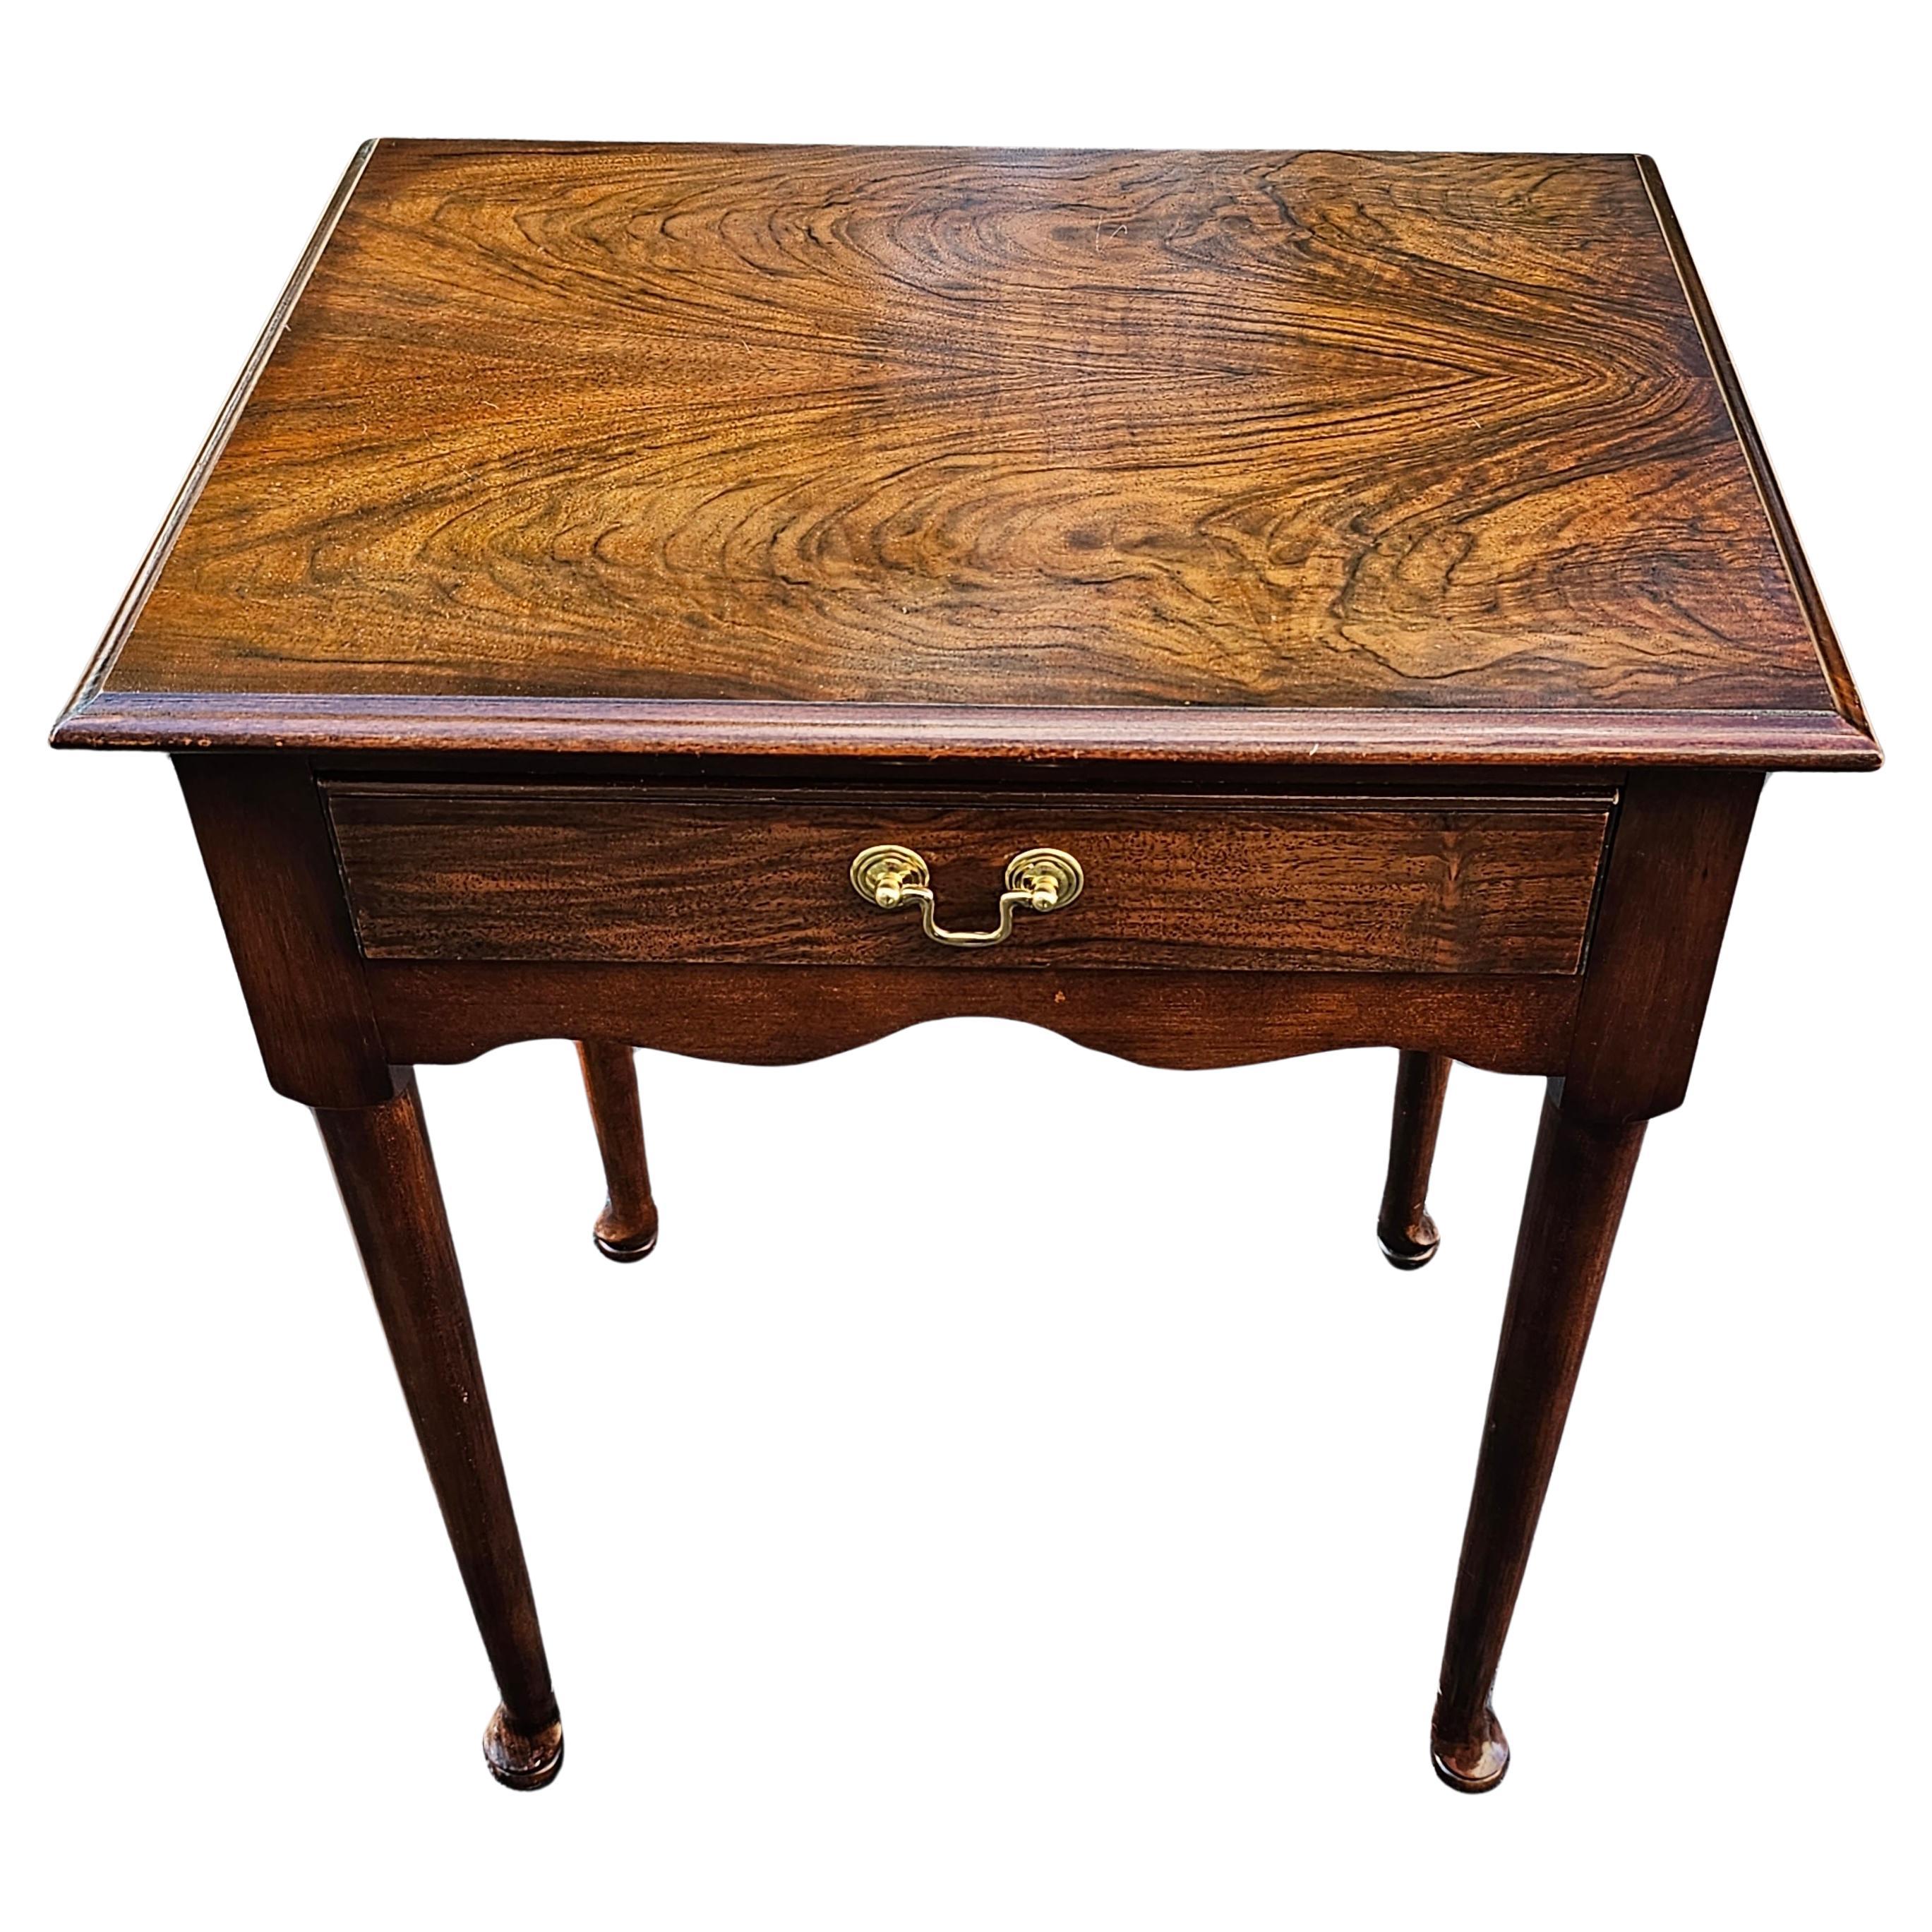 An exquisite Late 20th Century Flame Walnut Queen Anne Single Drawer work or Side Table in great vintage condition. Measures 22